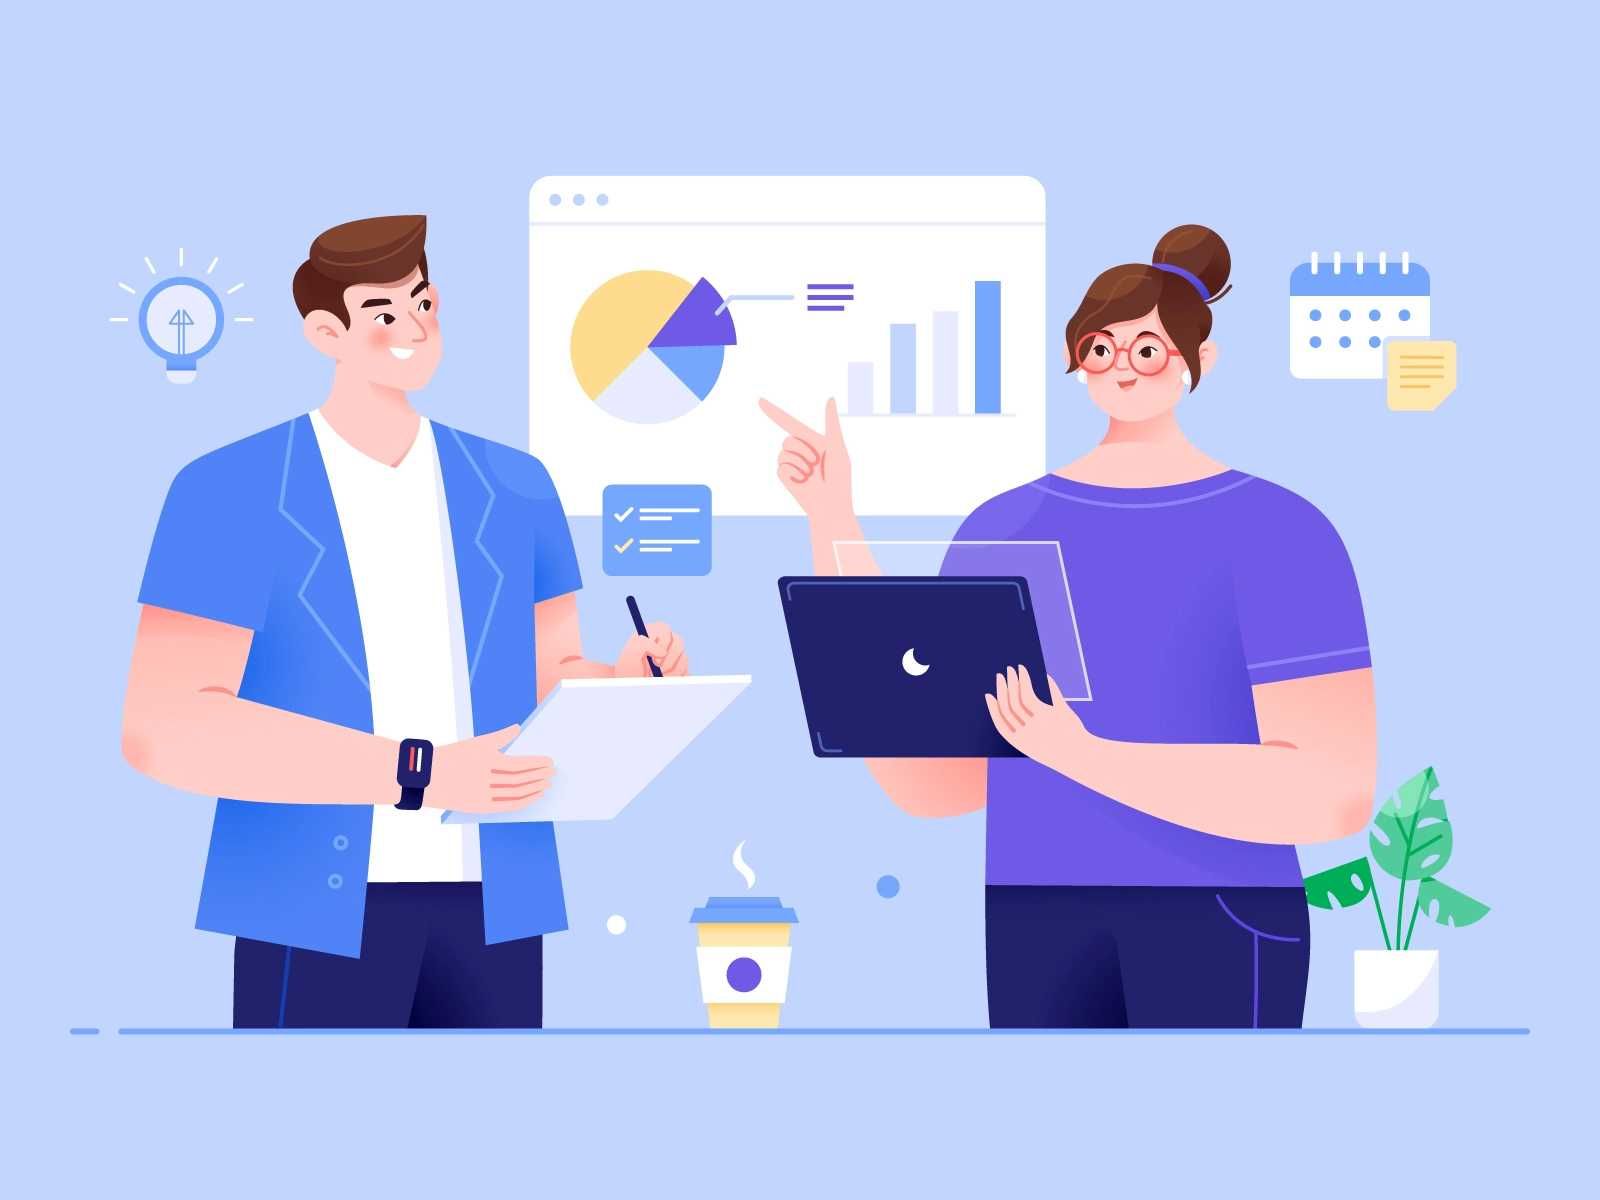 Your success depends not only on the pitch deck itself but also on how you manage to present it (*image by [Unini](https://dribbble.com/Unini){ rel="nofollow" target="_blank" .default-md}*)